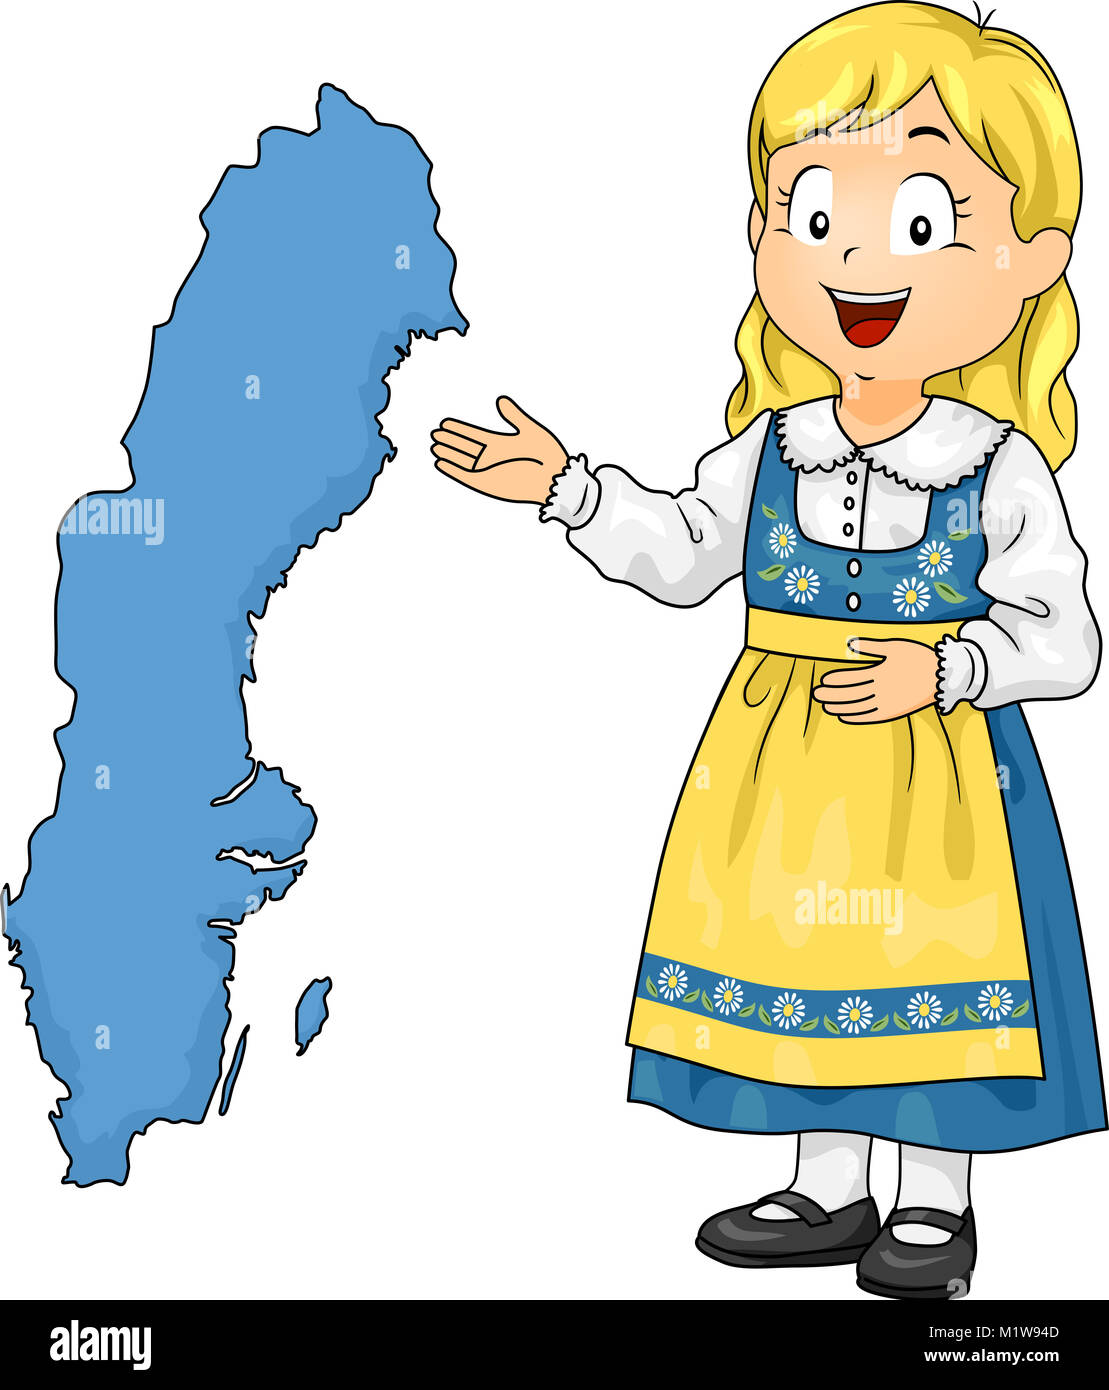 Illustration of a Kid Girl Wearing Swedish National Costume Presenting the Map of Sweden Stock Photo